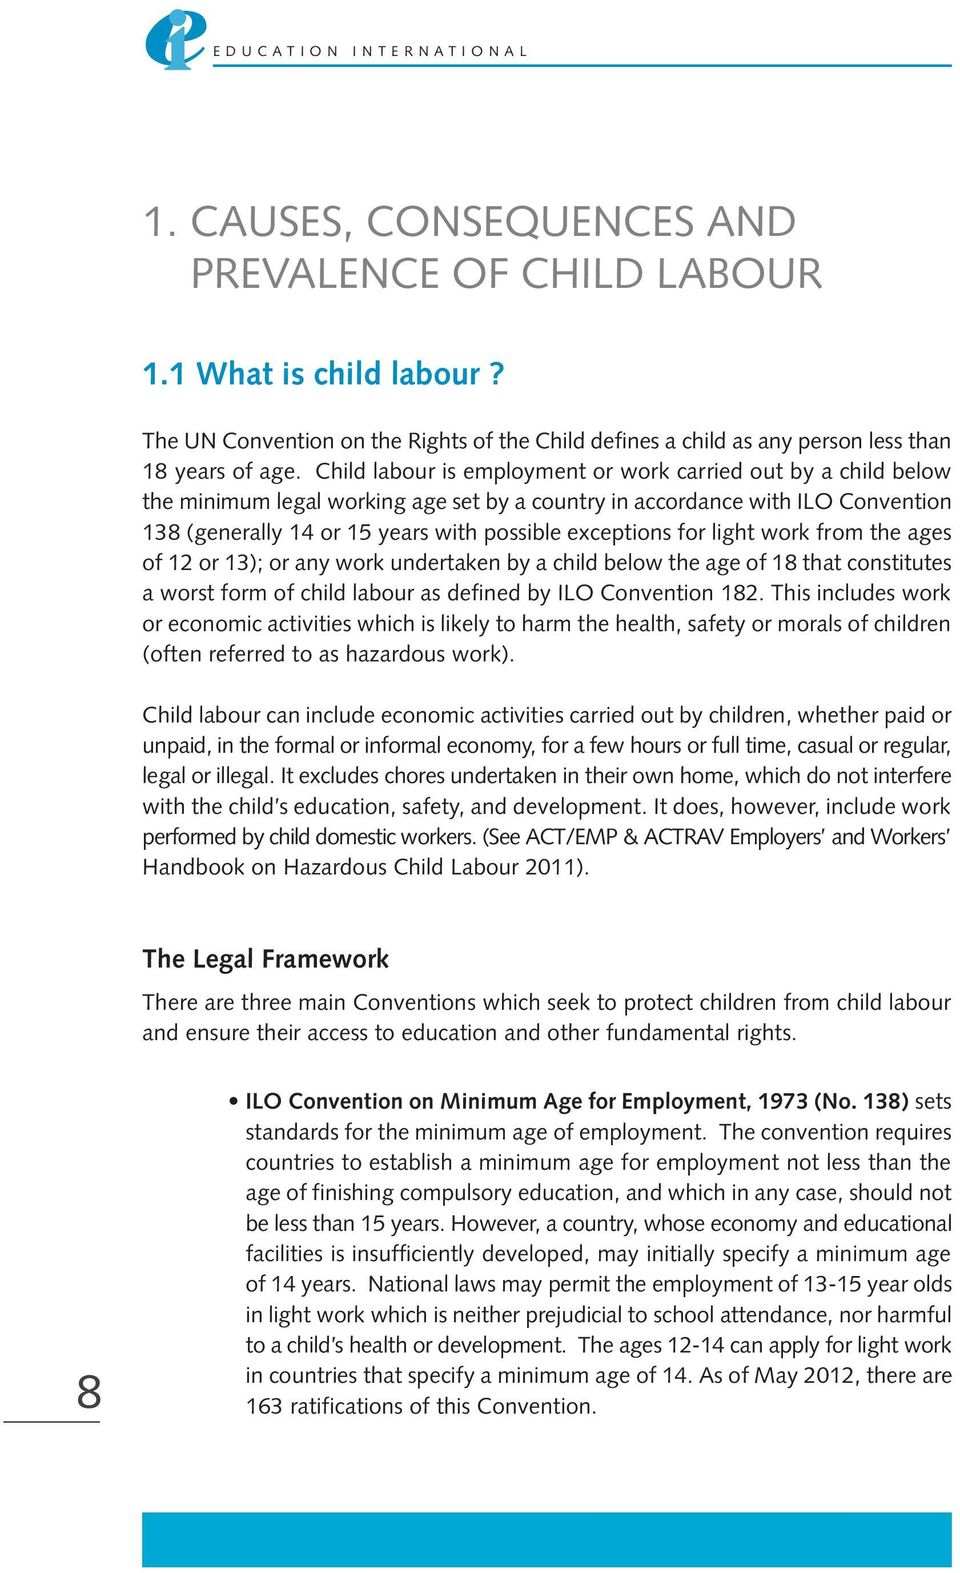 Child labour is employment or work carried out by a child below the minimum legal working age set by a country in accordance with ILO Convention 138 (generally 14 or 15 years with possible exceptions